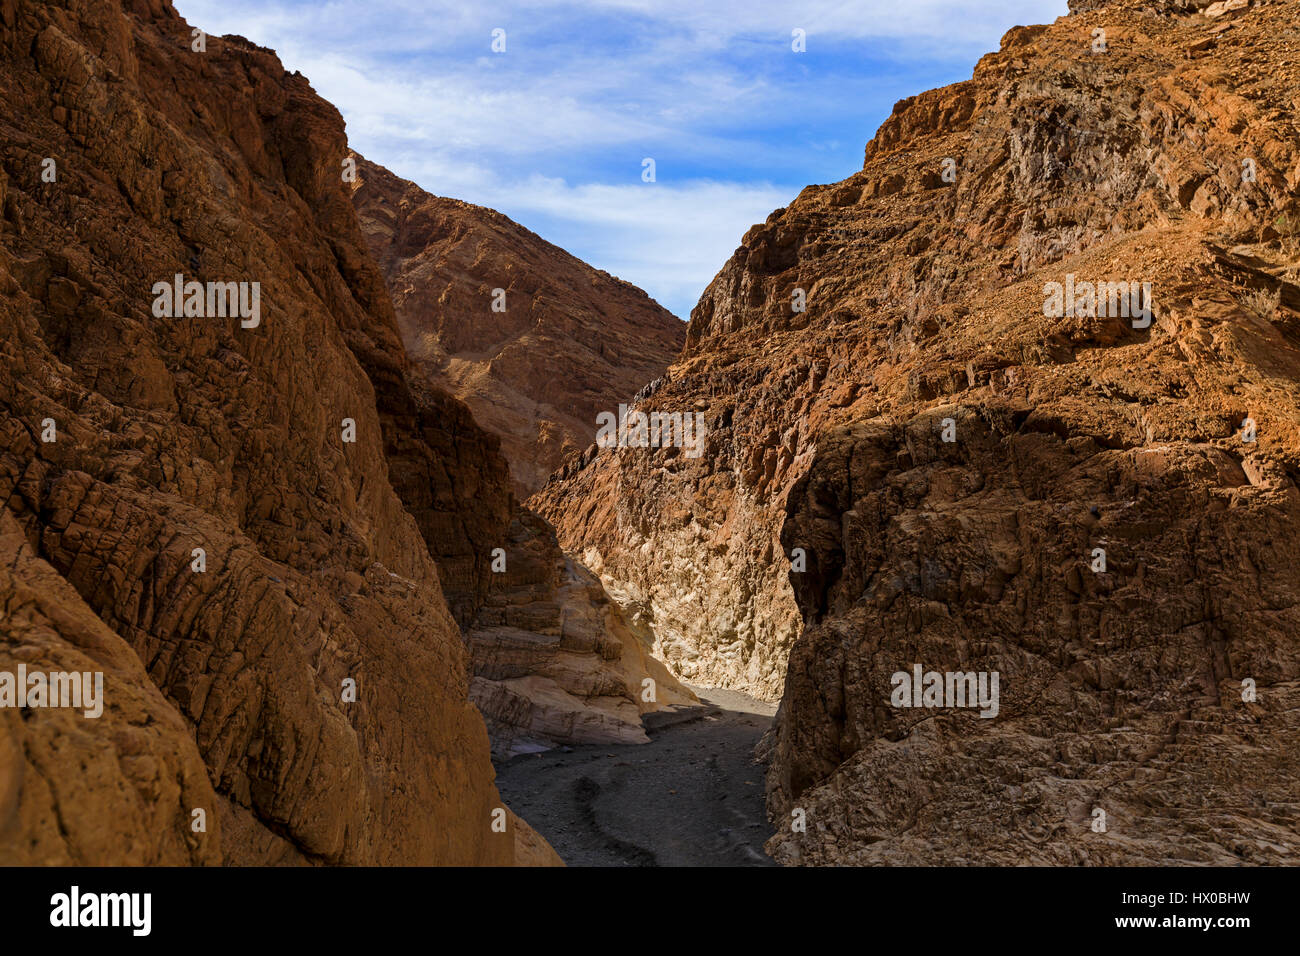 This view looks down through a section of copper-colored narrows of Mosaic Canyon in Death Valley National Park, California, USA. Stock Photo